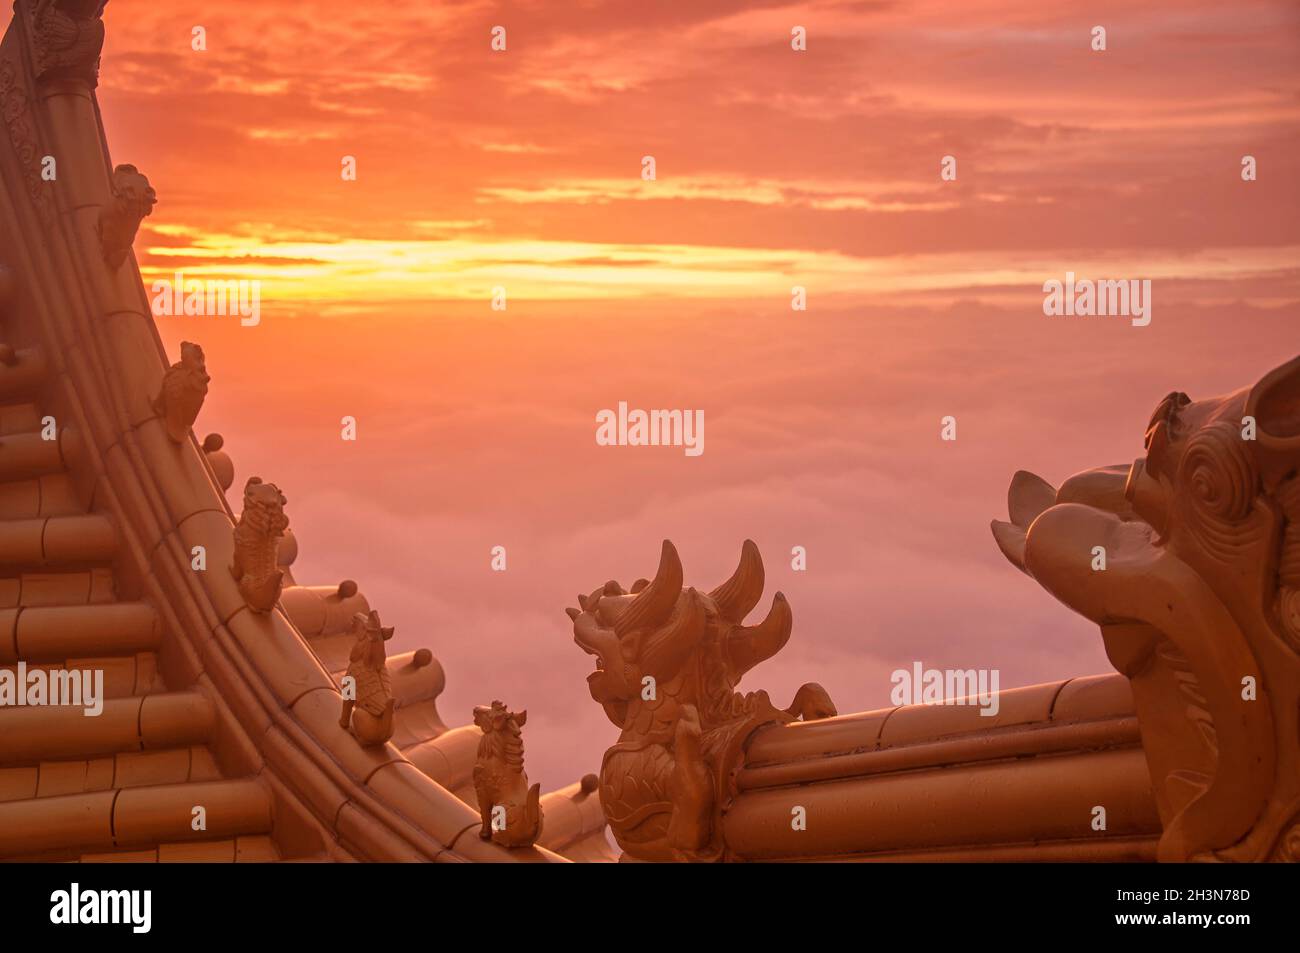 Small mythical creatures atop the buddhist golden hall as the sun rises on emeishan in sichuan province china. Stock Photo